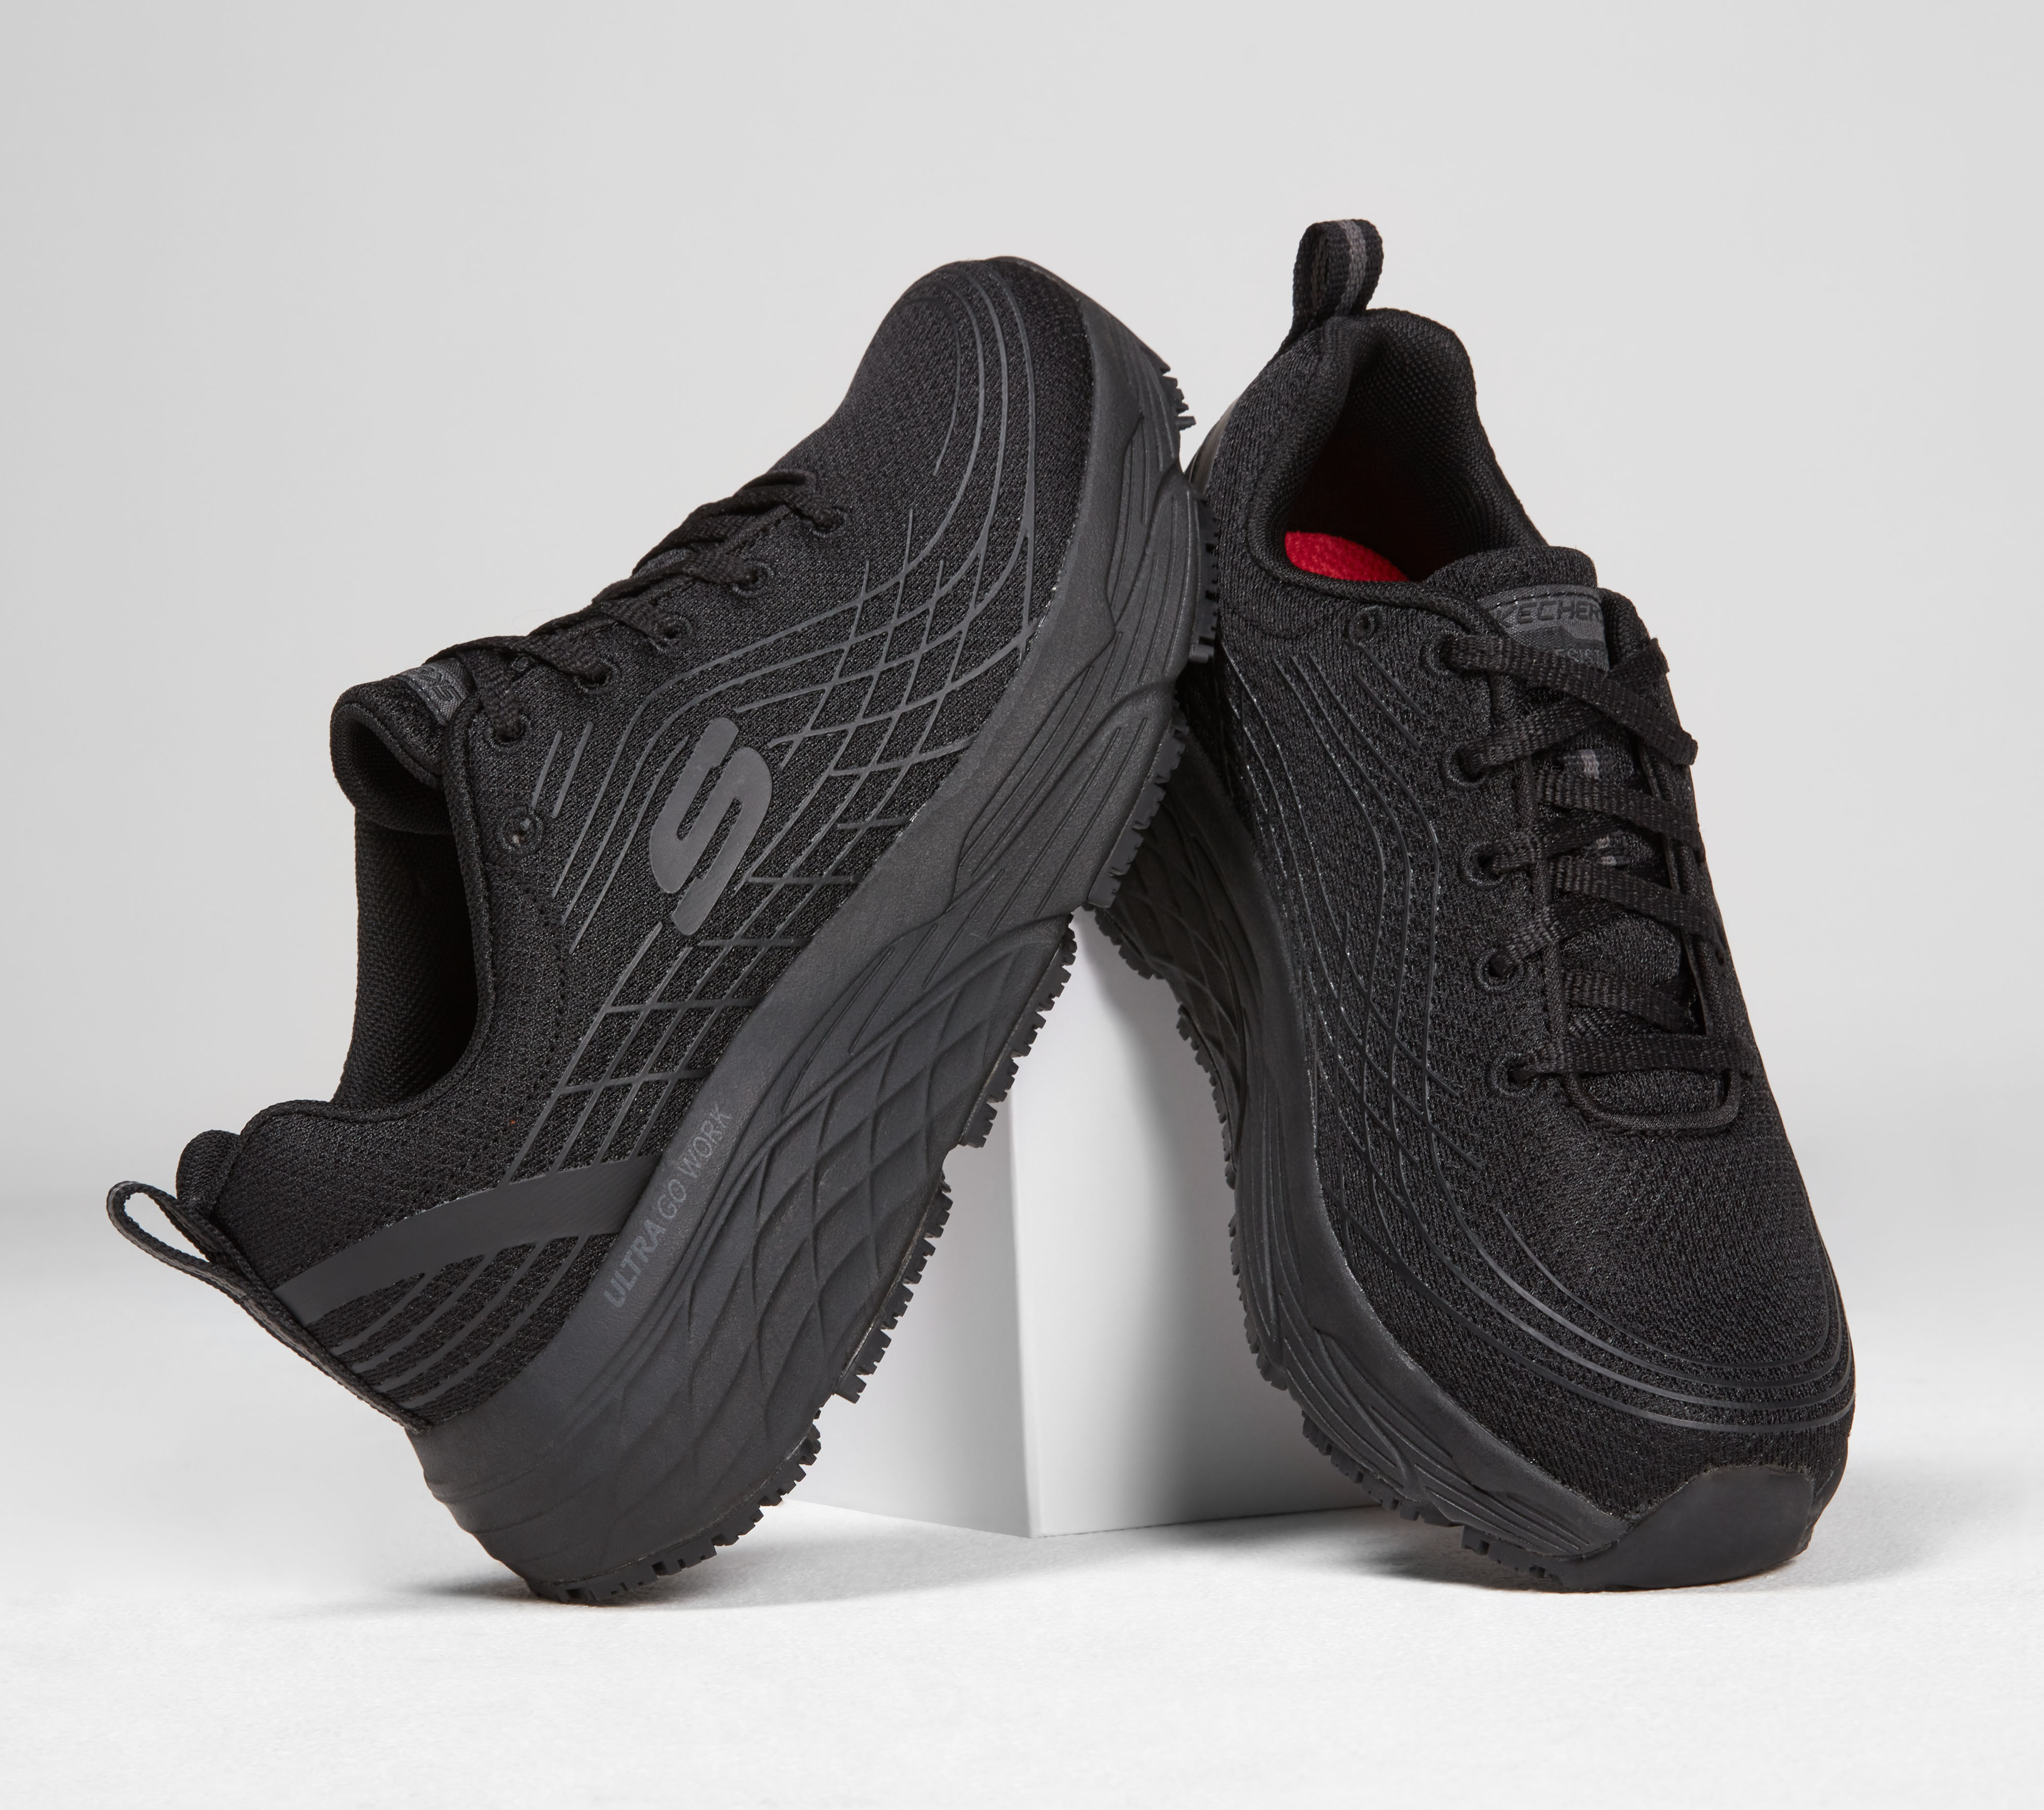 Work Relaxed Fit: Max Cushioning Elite SR | SKECHERS